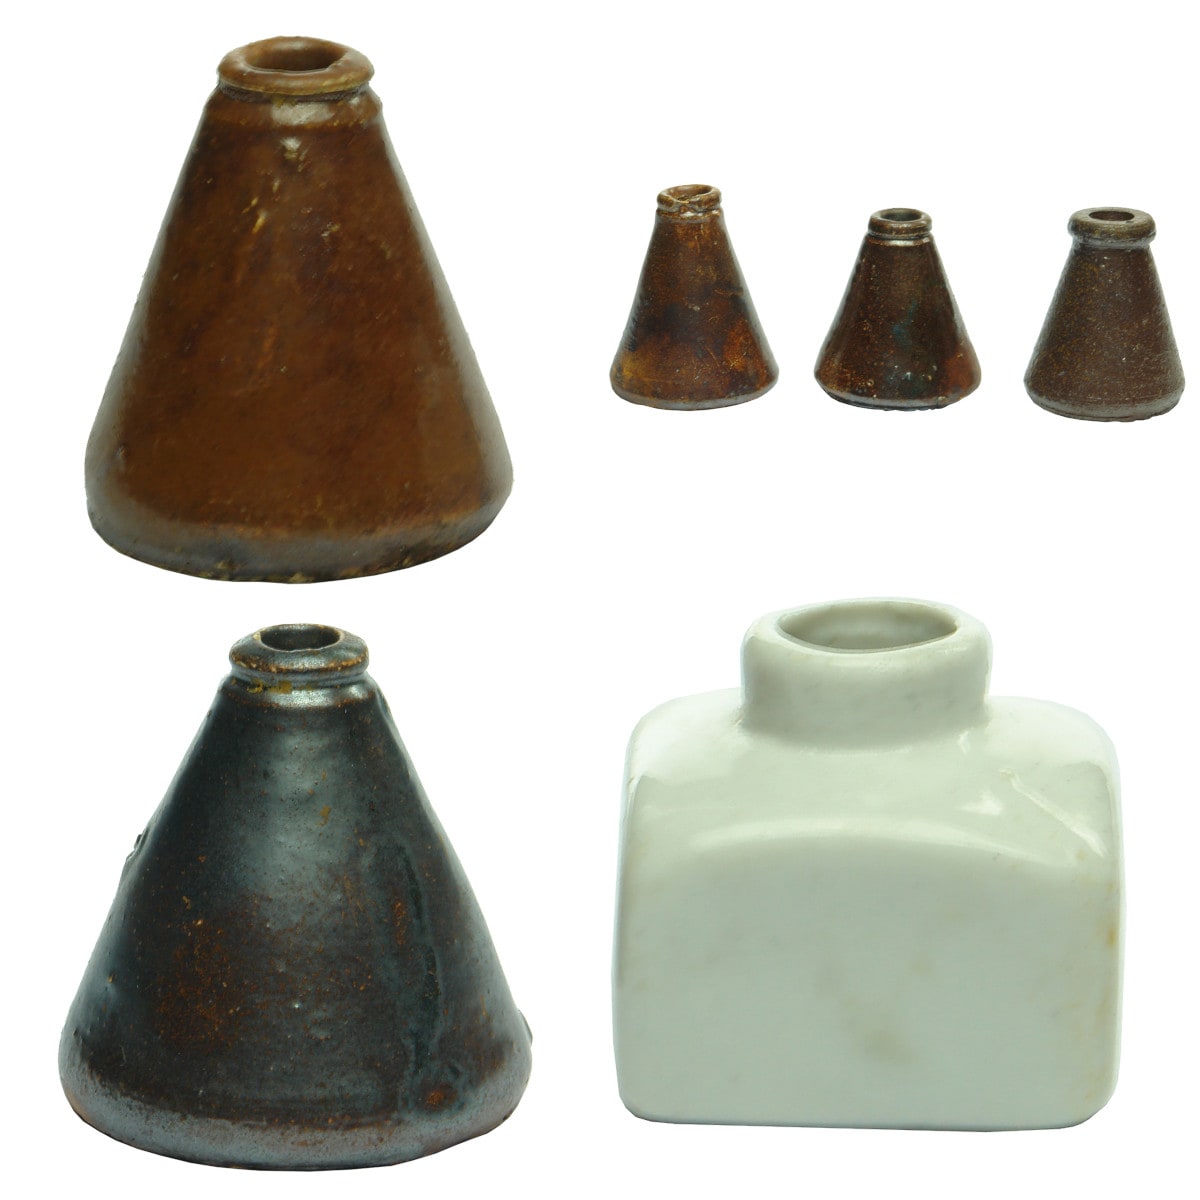 6 Inks. Five QLD Cone Inks. Stoneware. Differing lip styles and glazes. (Queensland) and a small slip mould porcelain ink.